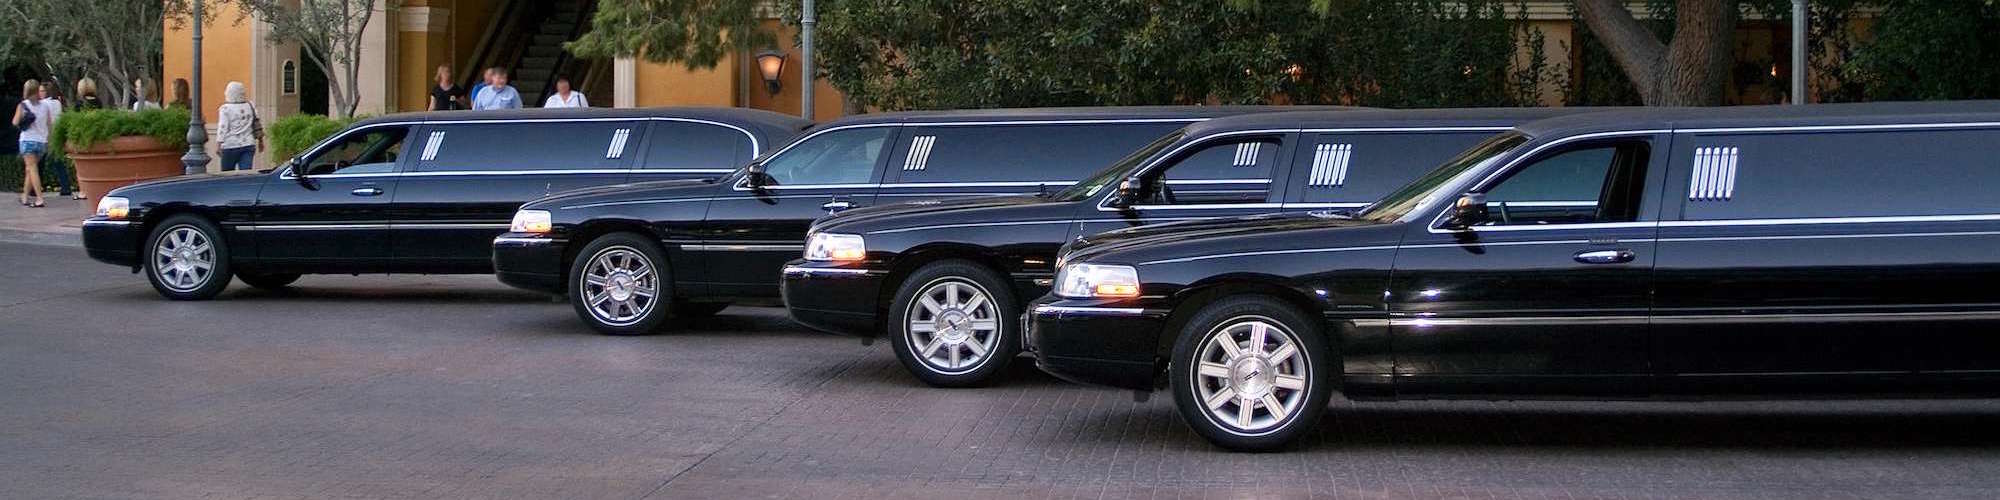 Tampa limo service rentals